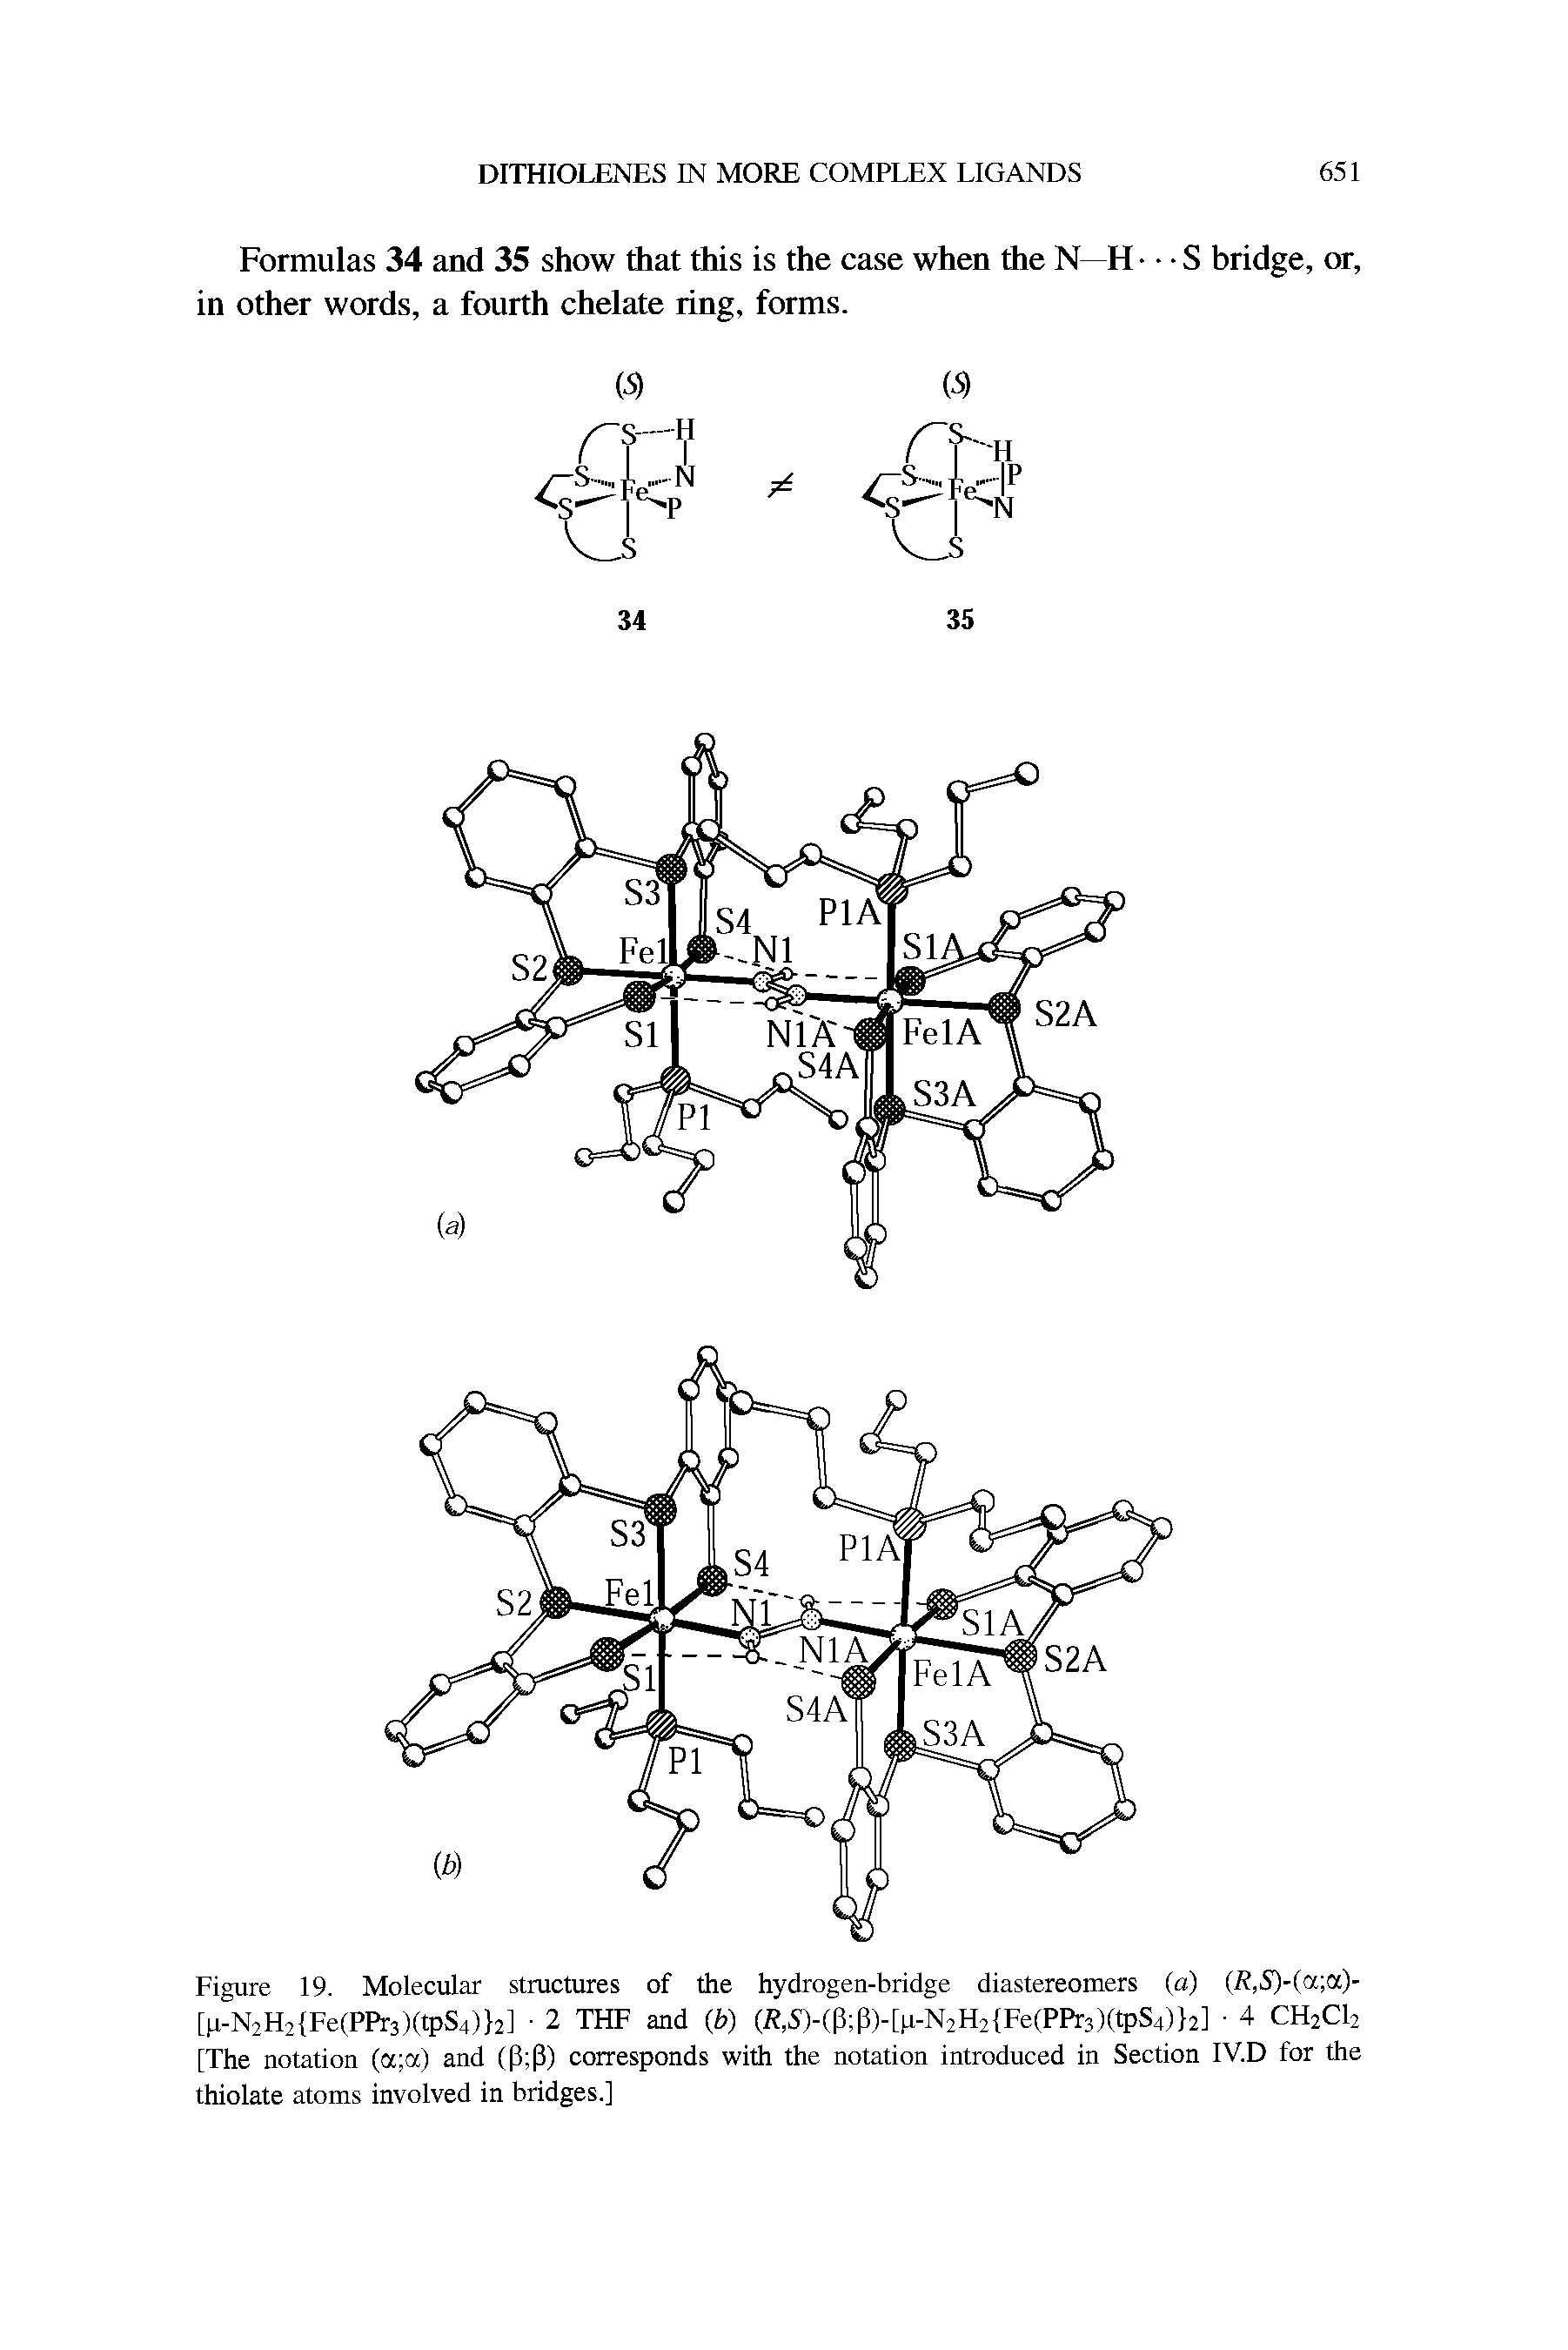 Figure 19. Molecular structures of the hydrogen-bridge diastereomers (a) (R,S)-(a a)-[p-N2H2 Fe(PPr3)(tpS4) 2] 2 THF and (b) (R,S)-(P P)-[p-N2H2 Fe(PPr3)(tpS4) 2] 4 CH2C12 [The notation (a a) and (P P) corresponds with the notation introduced in Section IV.D for the thiolate atoms involved in bridges.]...